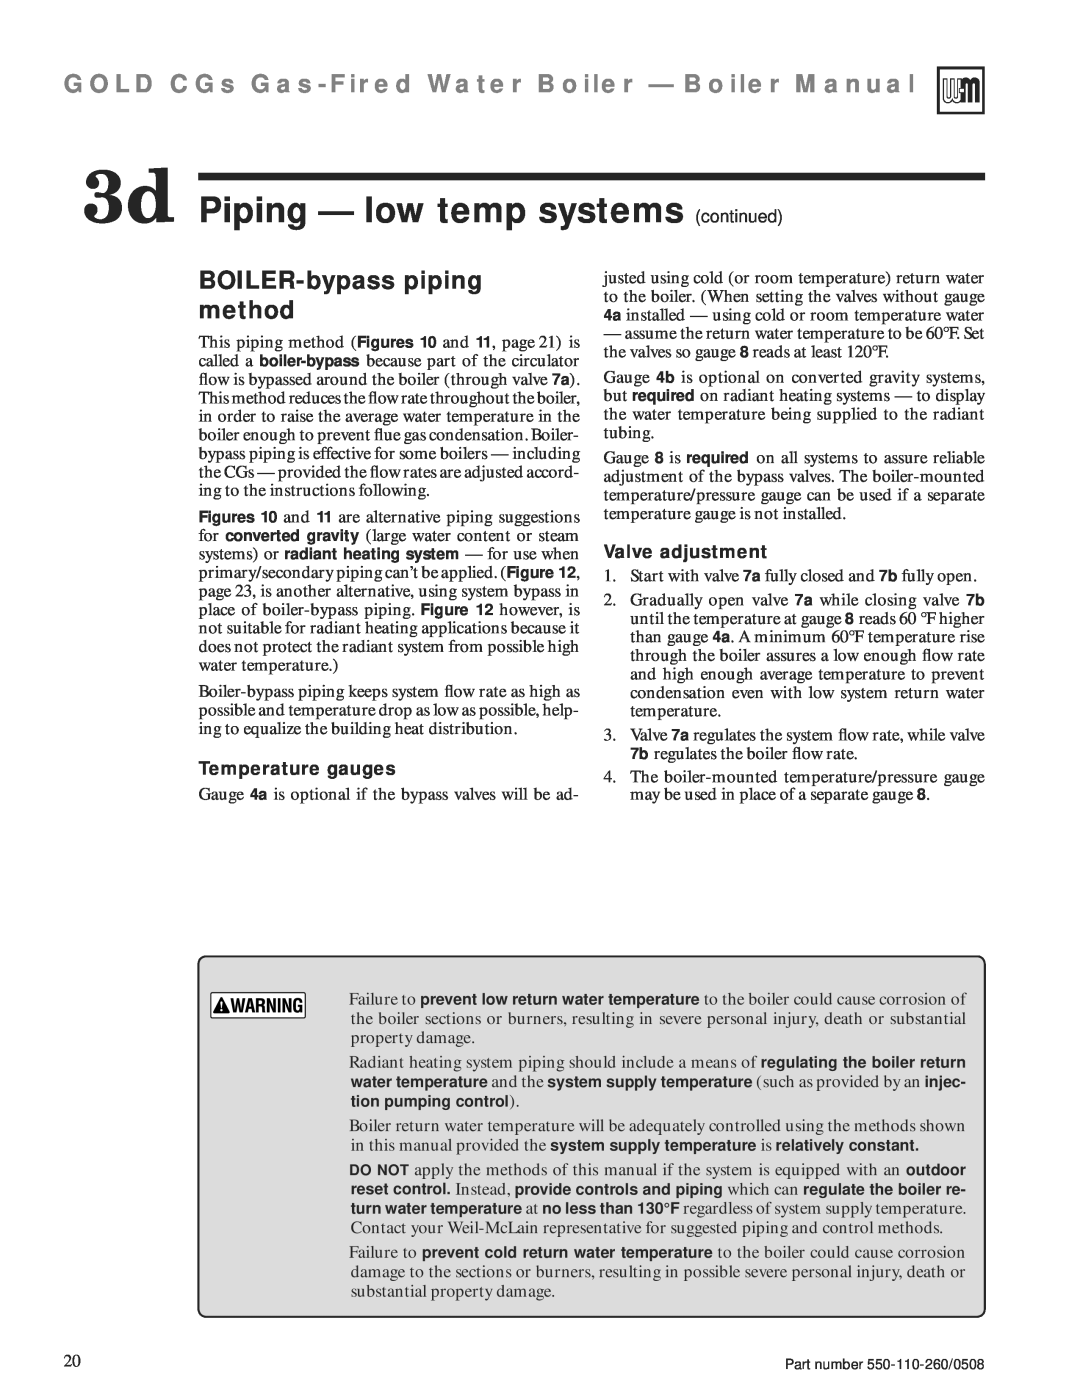 Weil-McLain 550-110-260/0508 manual BOILER-bypasspiping method, 3d Piping — low temp systems continued, Temperature gauges 